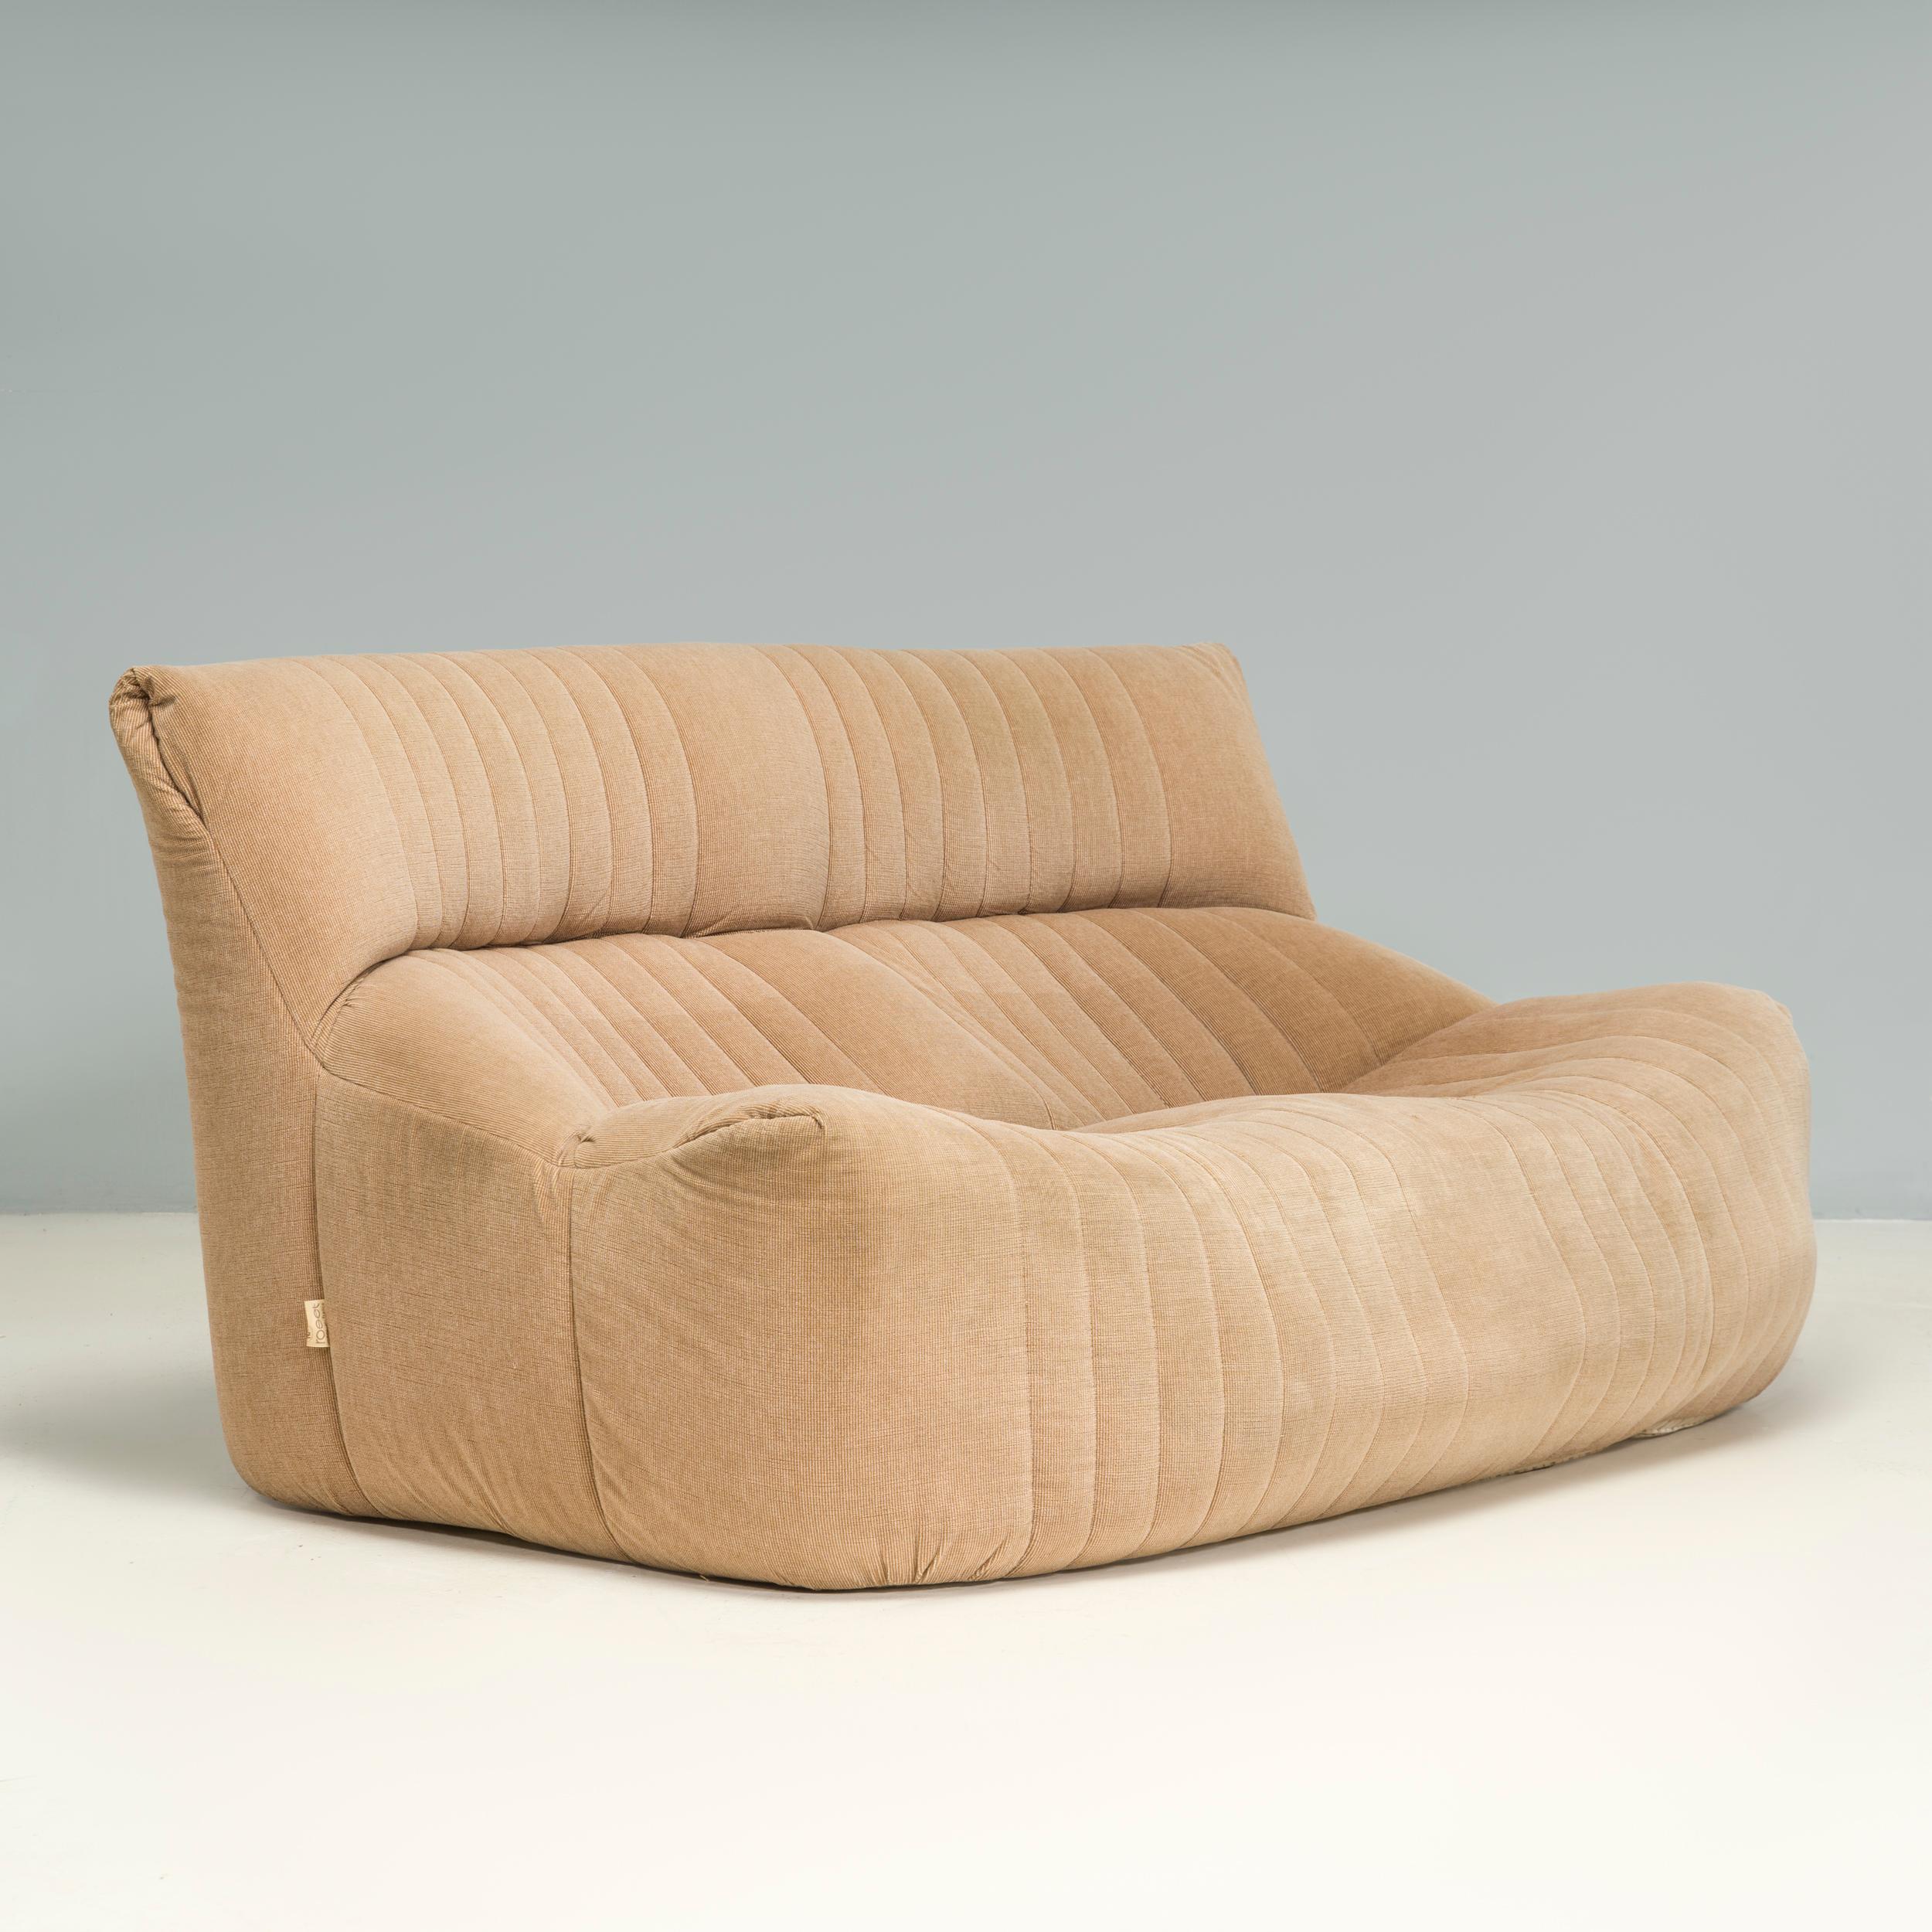 Designed by Michel Ducaroy for Ligne Roset, the Aralia sofa is similar in style to the iconic Togo and Kashima designs.

Built for laid back comfort, the two seat sofa is constructed solely from foam with a boxy silhouette and angled